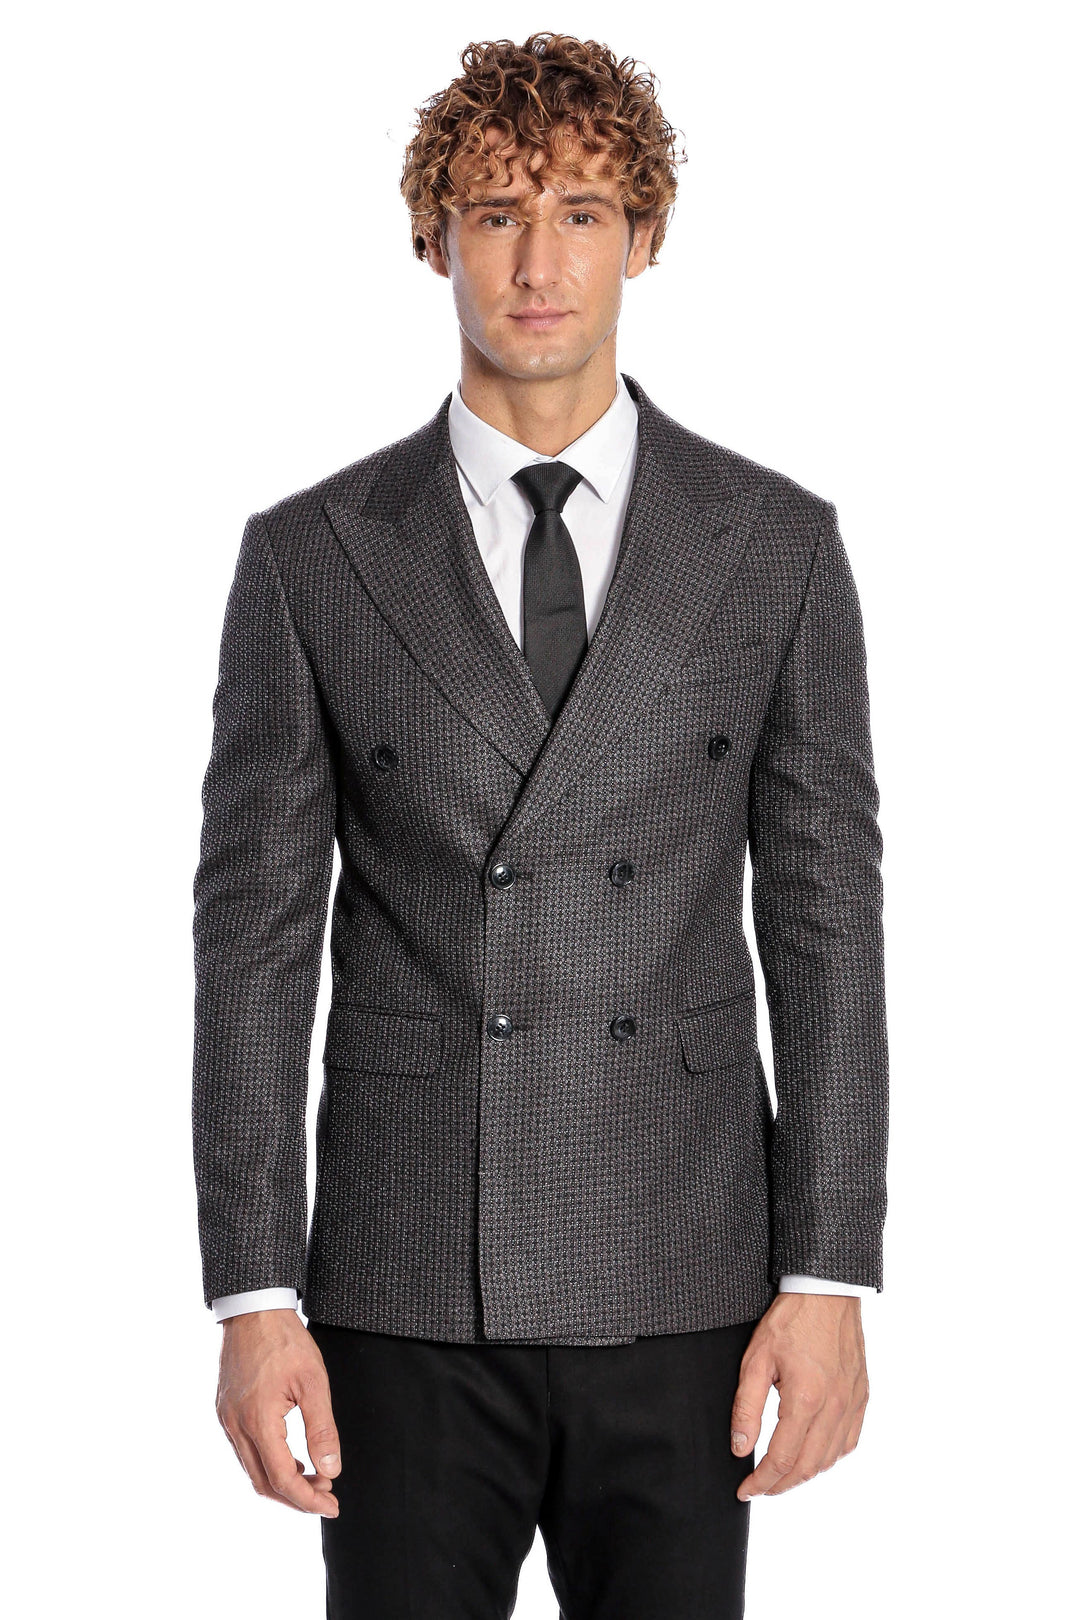 Houndstooth Patterned Grey Men Double Breasted Blazer - Wessi